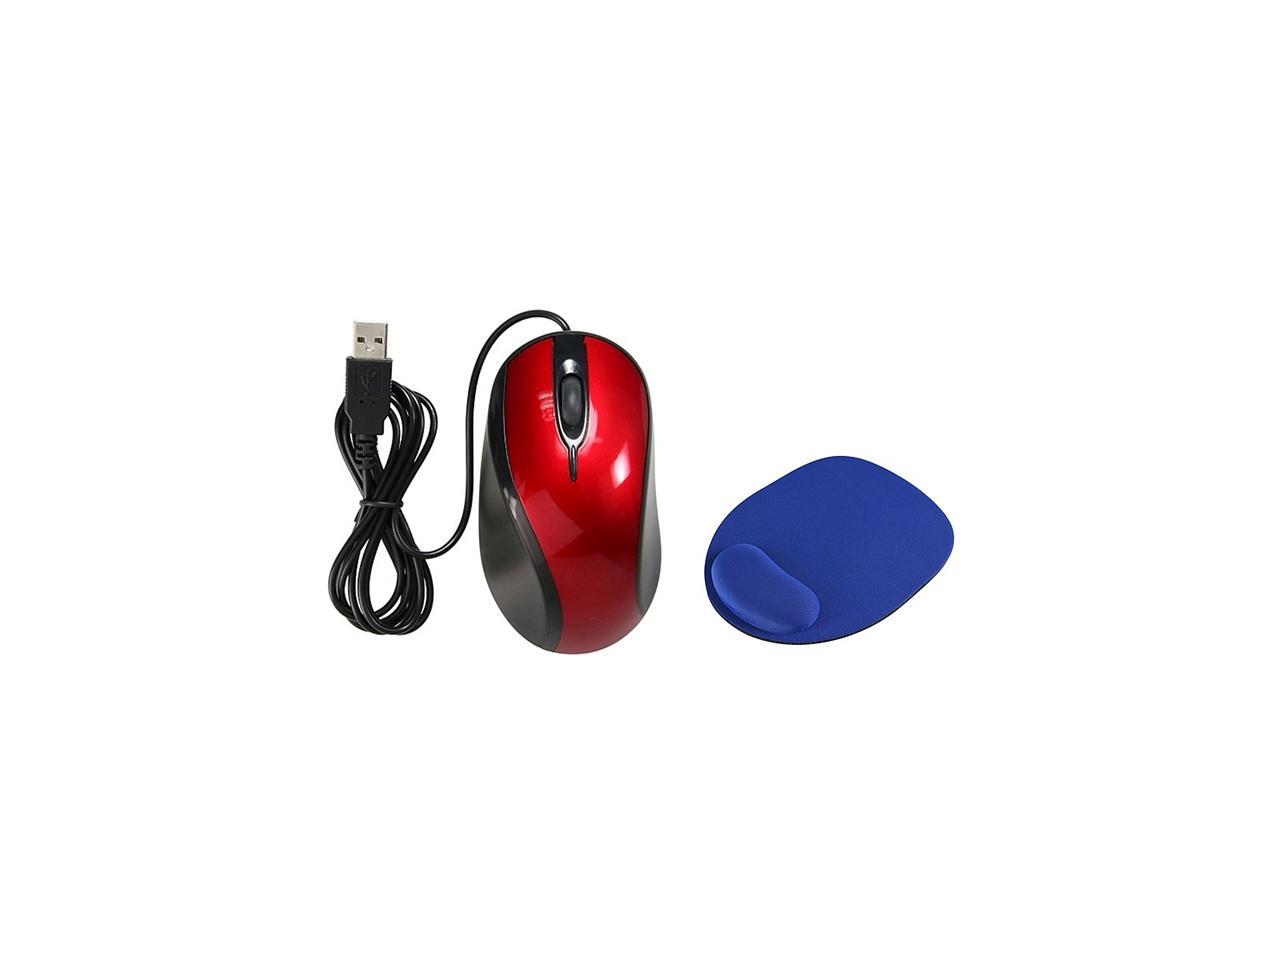 Insten Red USB 2.0 Ergonomic Optical Scroll Wheel Mouse Blue Wrist Comfort Mouse Pad 